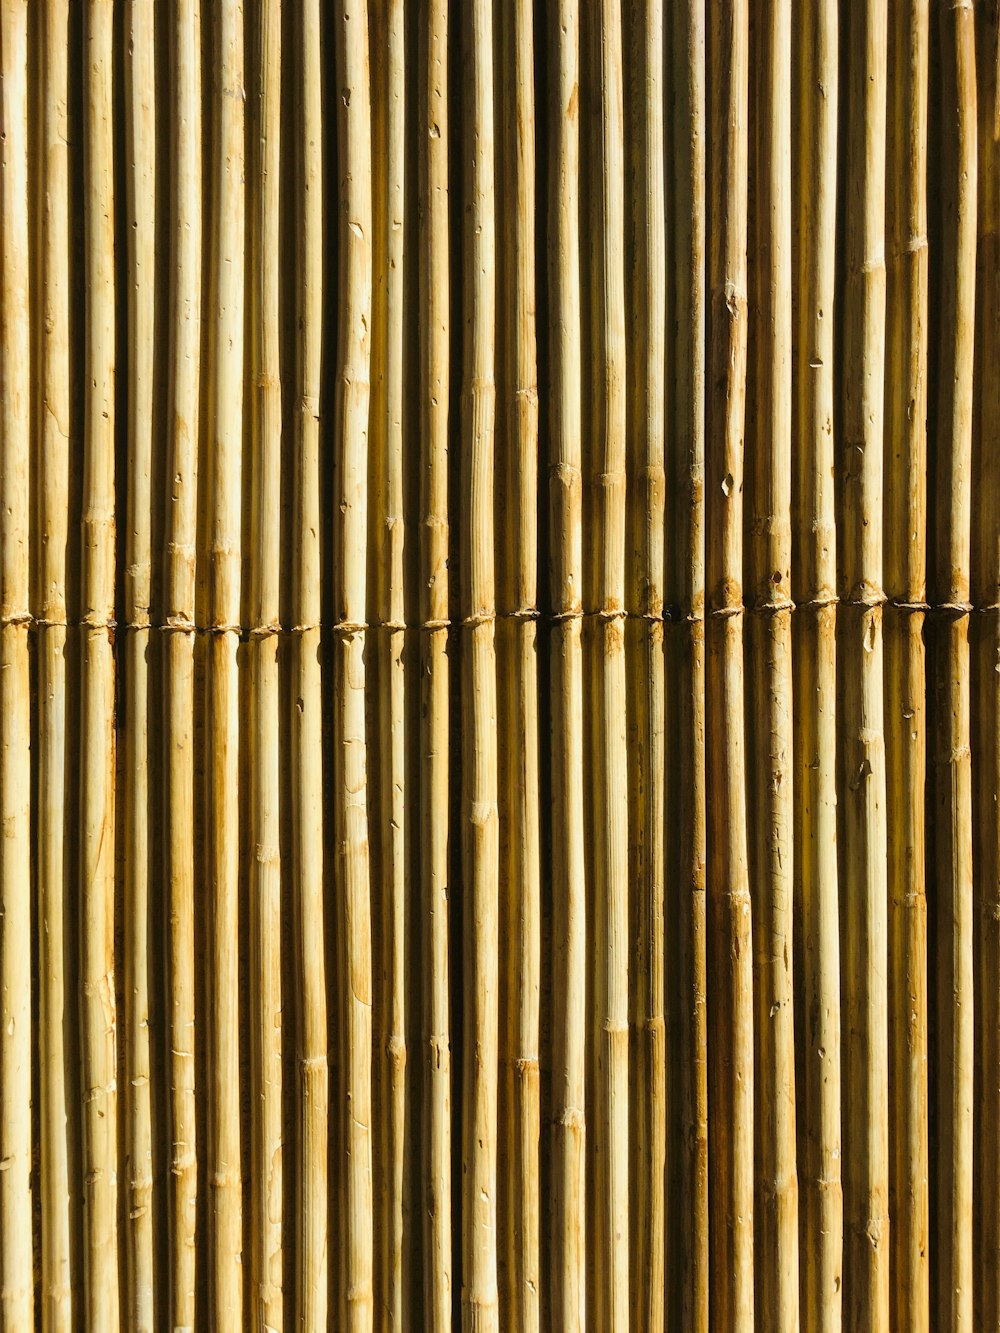 A close up of a bamboo stick with a bug crawling on it photo – Free Bamboo  Image on Unsplash